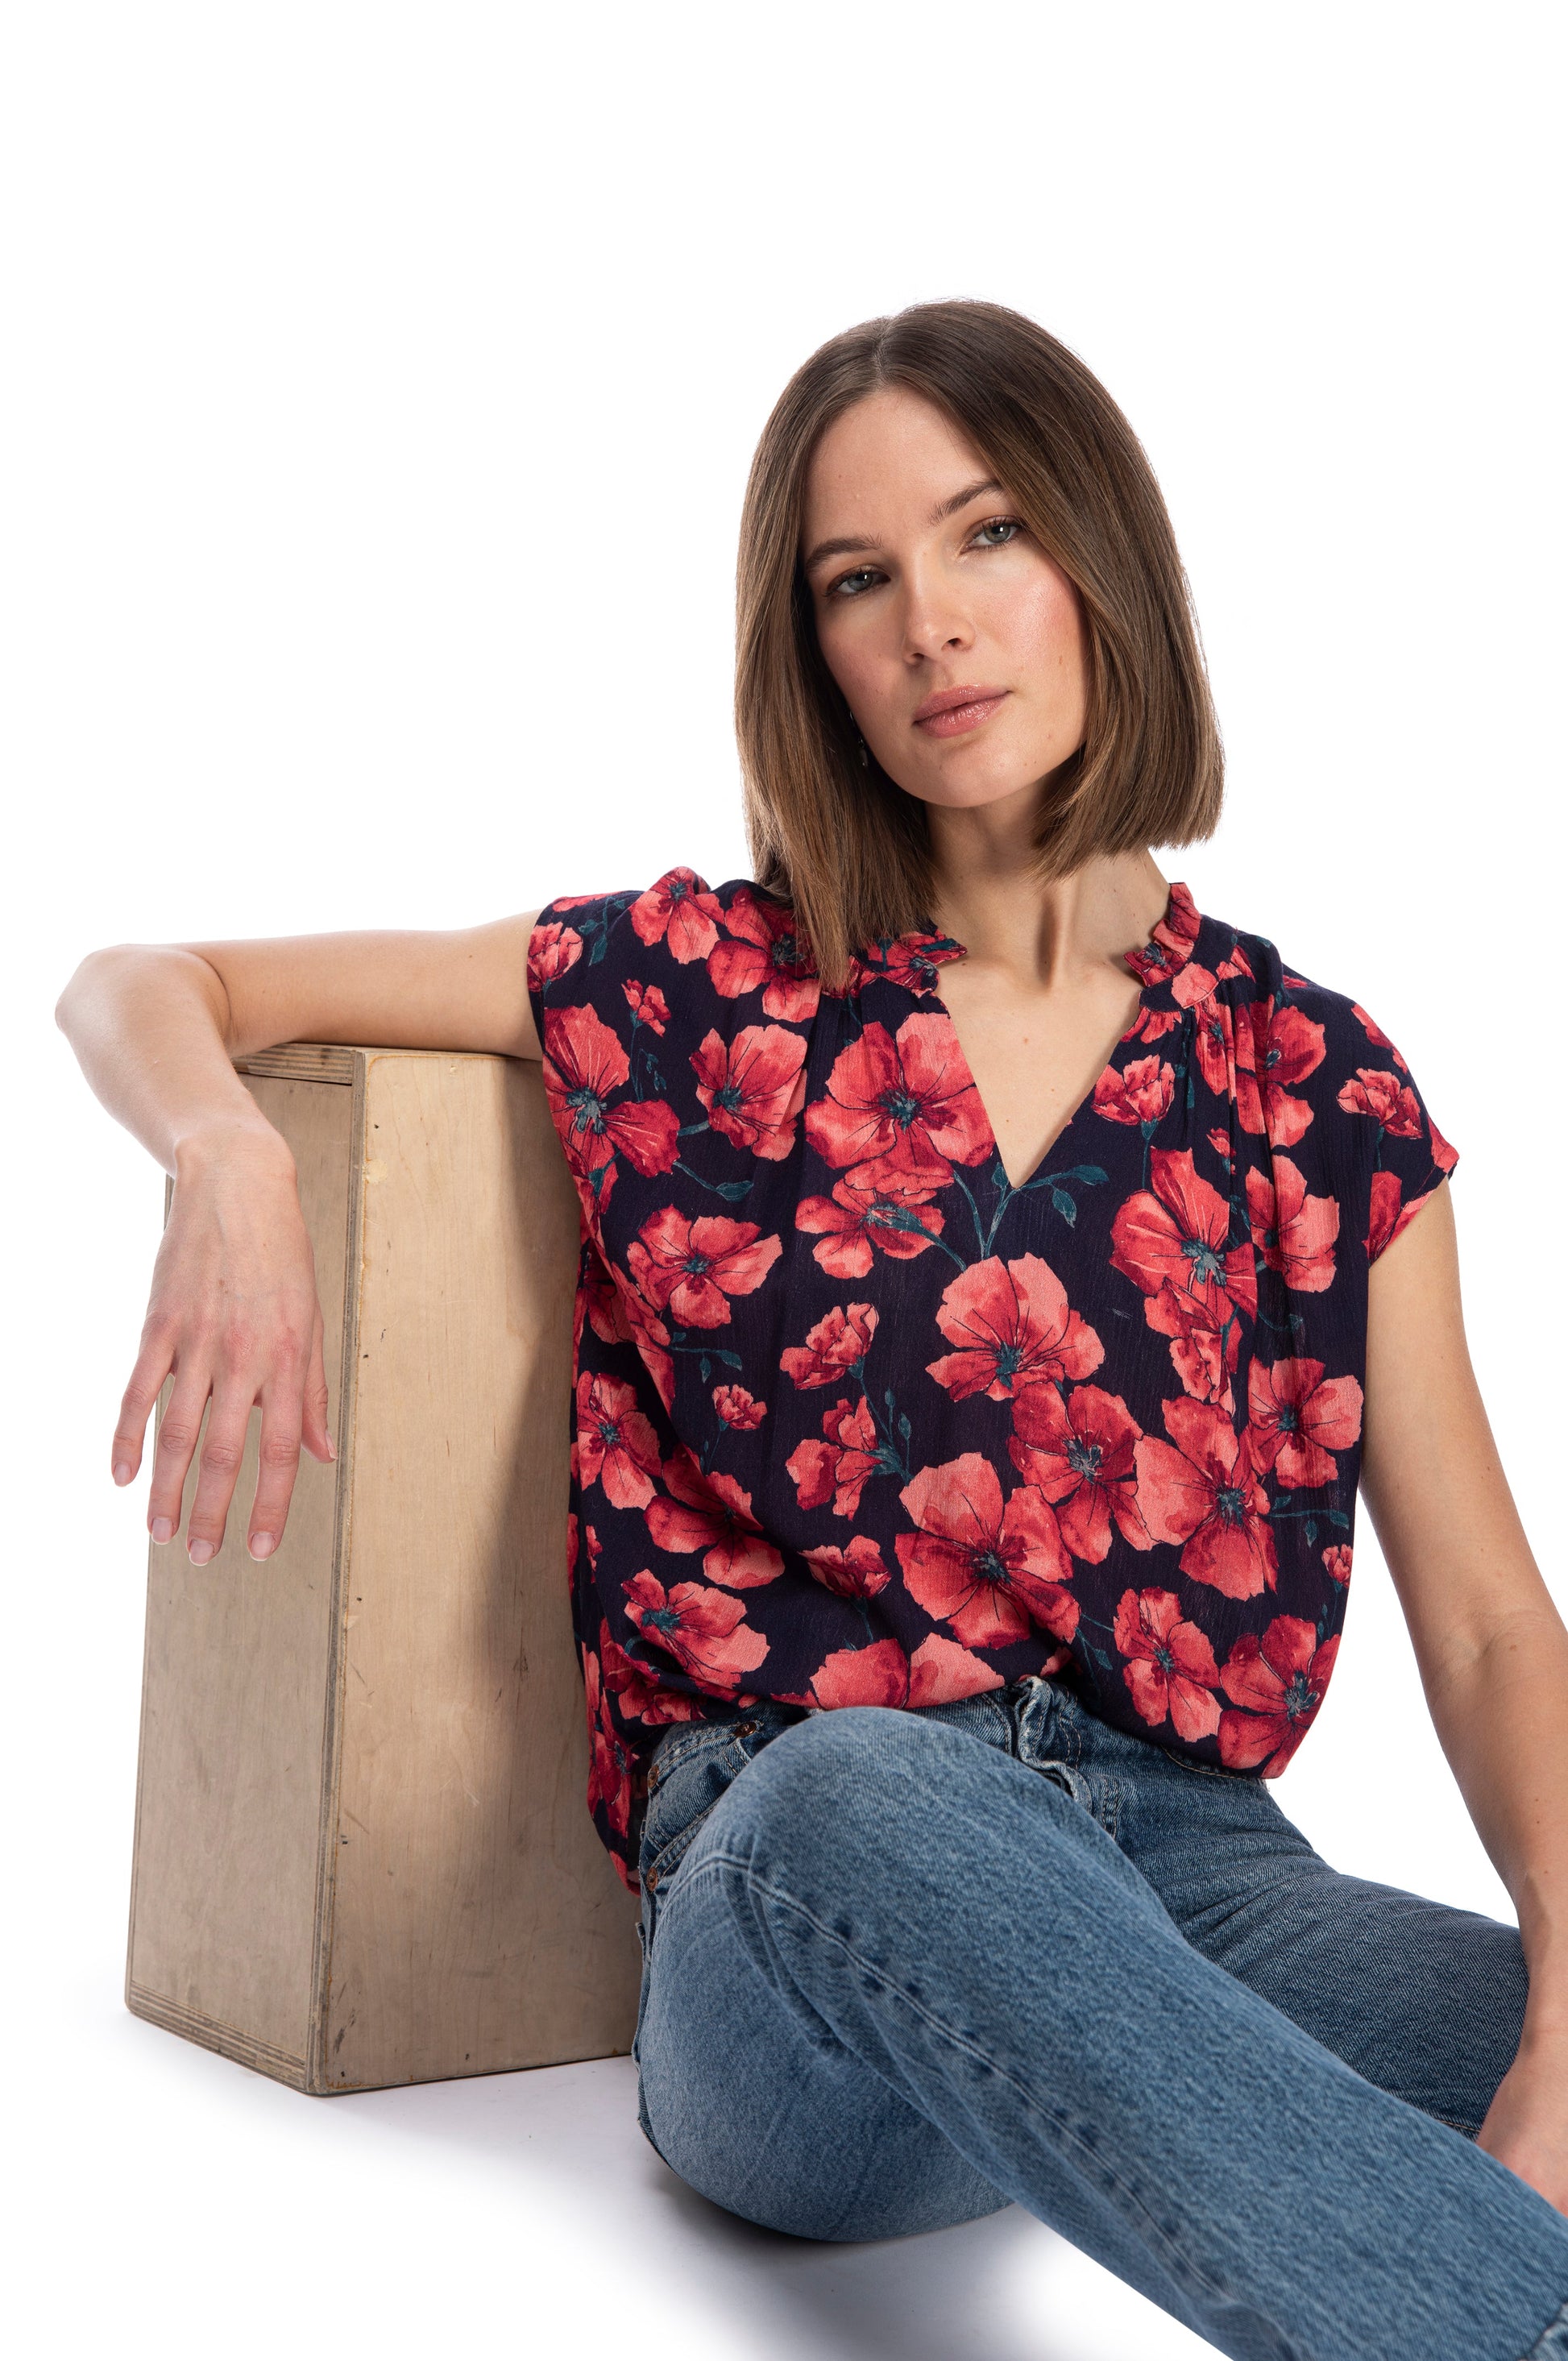 A woman in a short sleeve, floral RUFFLE NECK TOP from B Collection by Bobeau and jeans sitting casually next to a wooden box, with a relaxed and confident posture, against a white background.